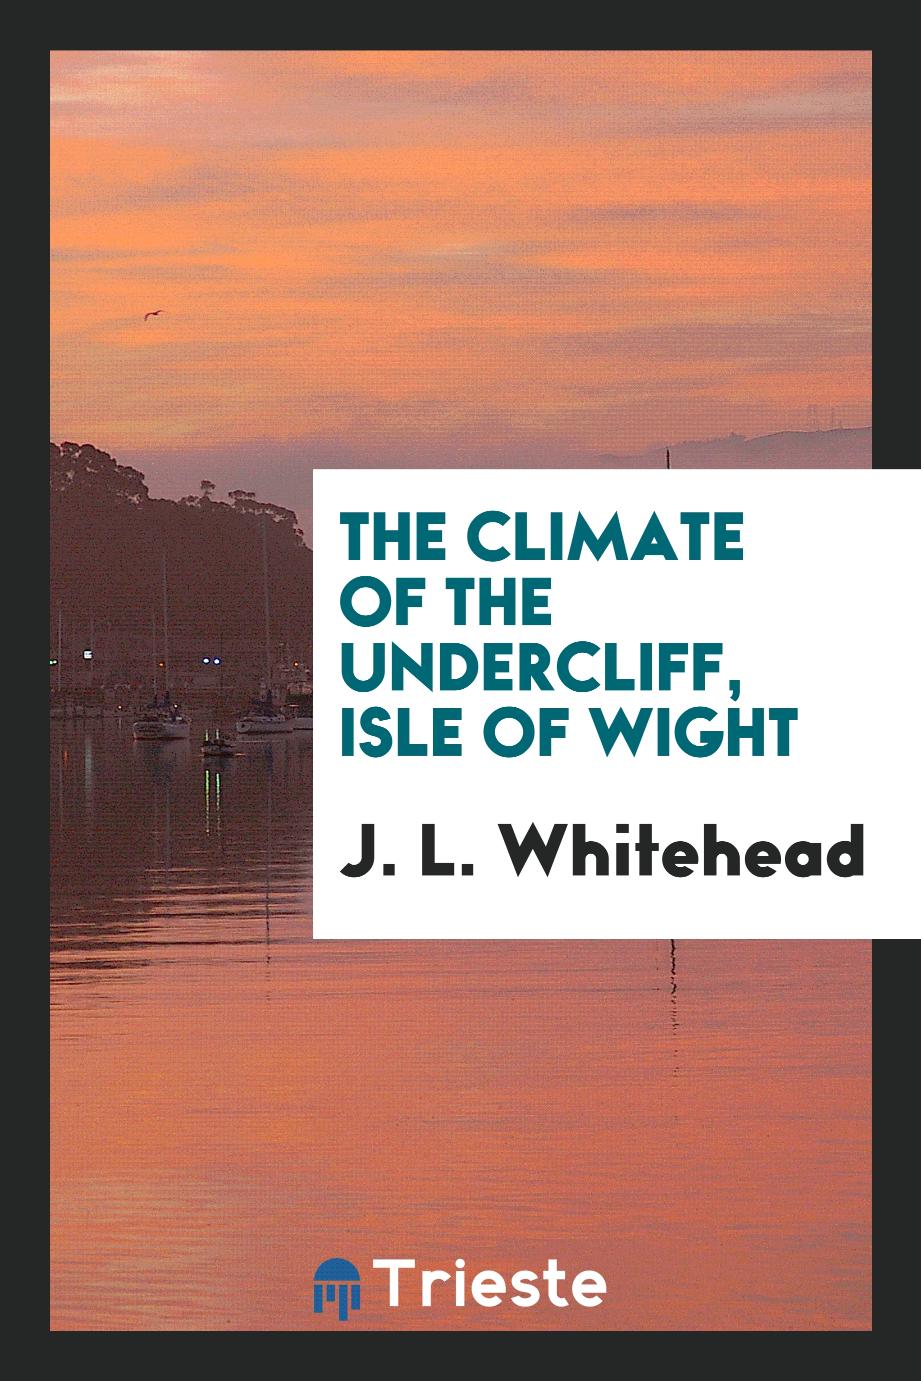 J. L. Whitehead - The climate of the Undercliff, Isle of Wight